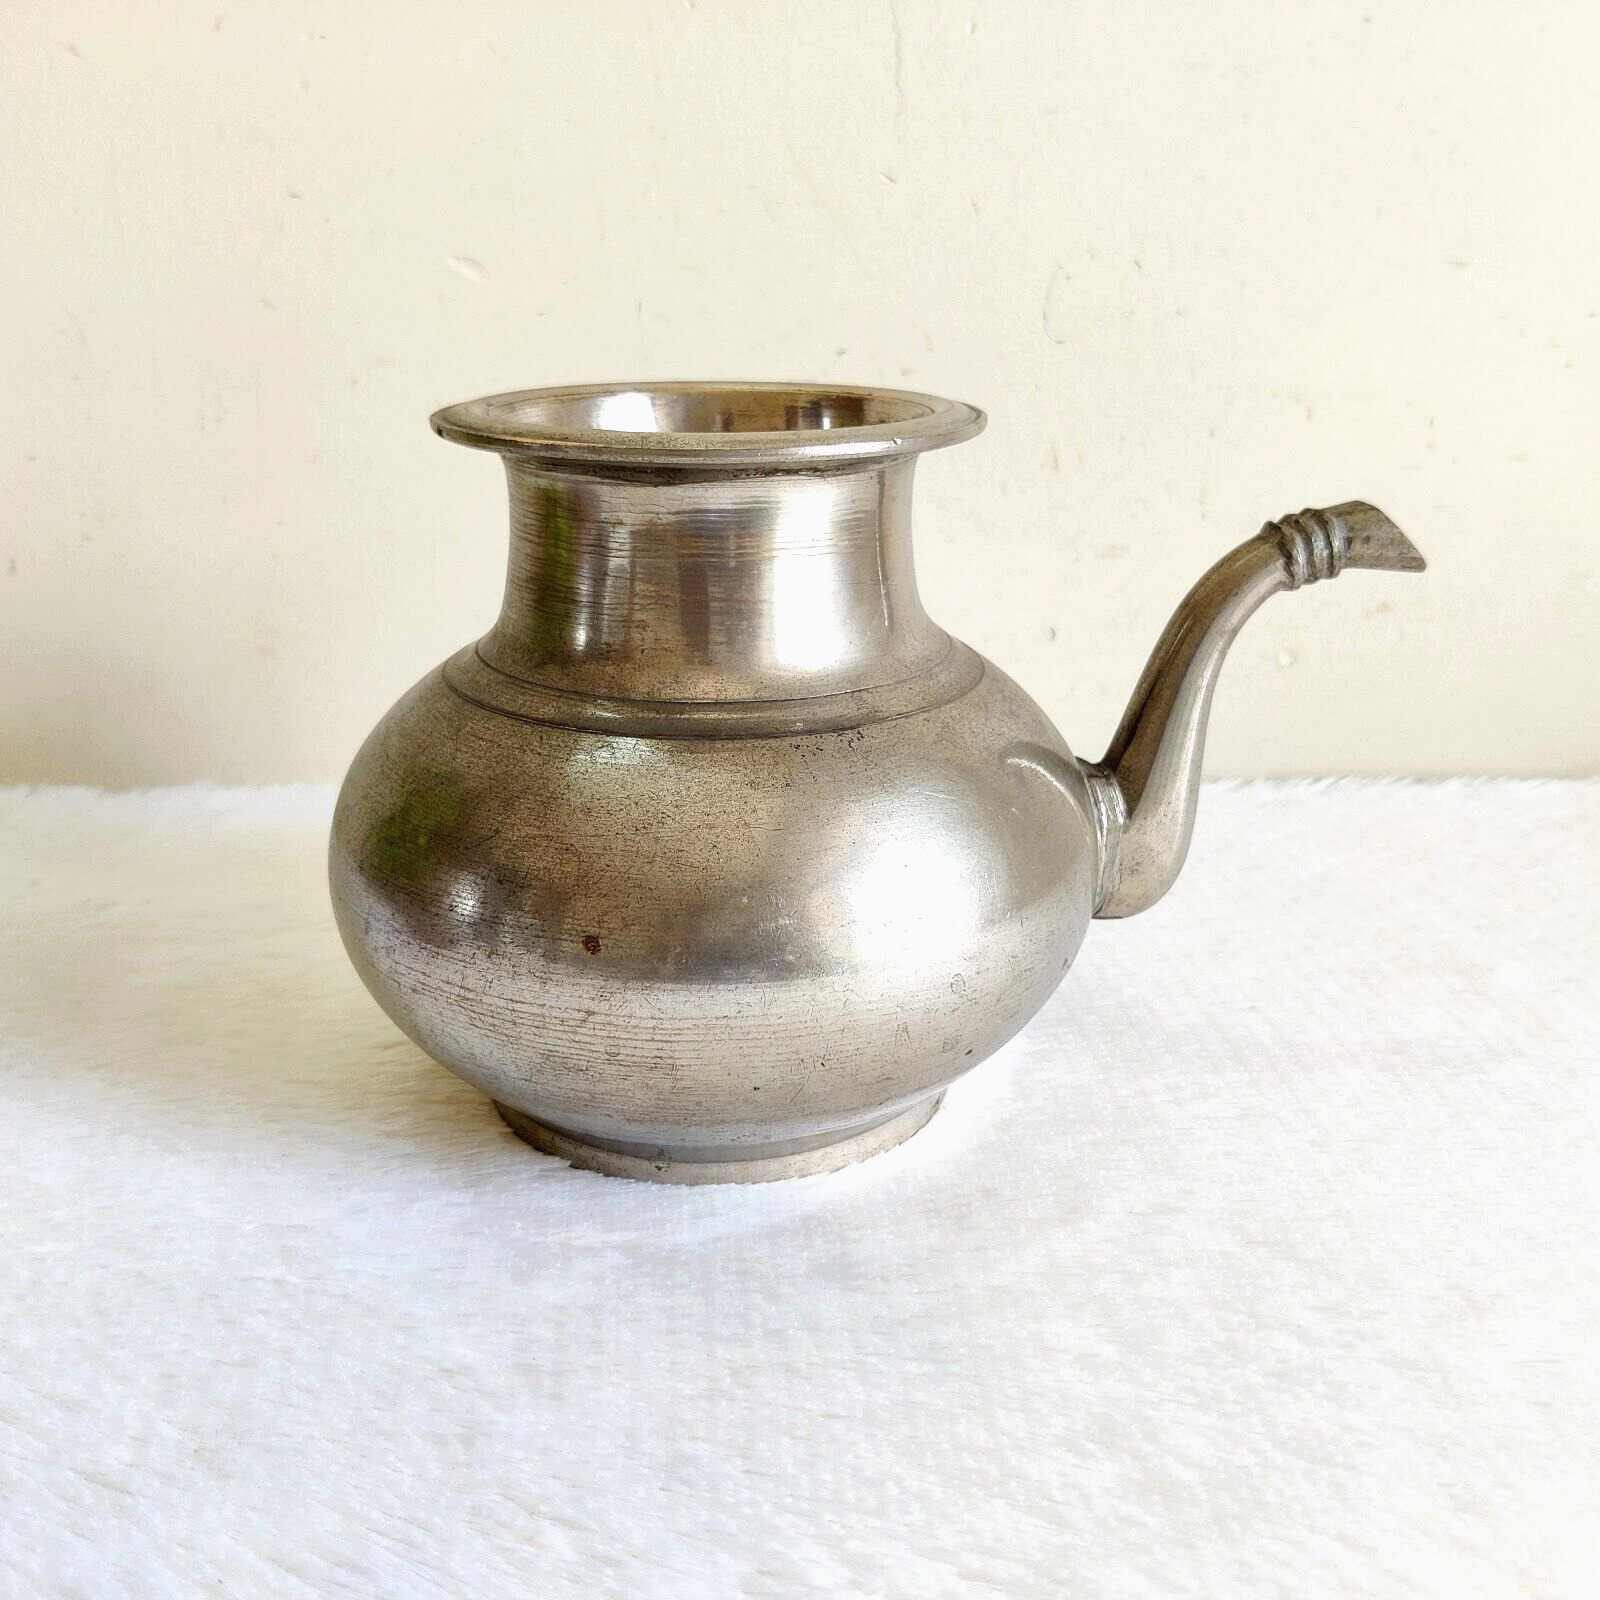 Vintage Nickel Coated Brass Water Pot With Spout Decorative Collectible Old M105